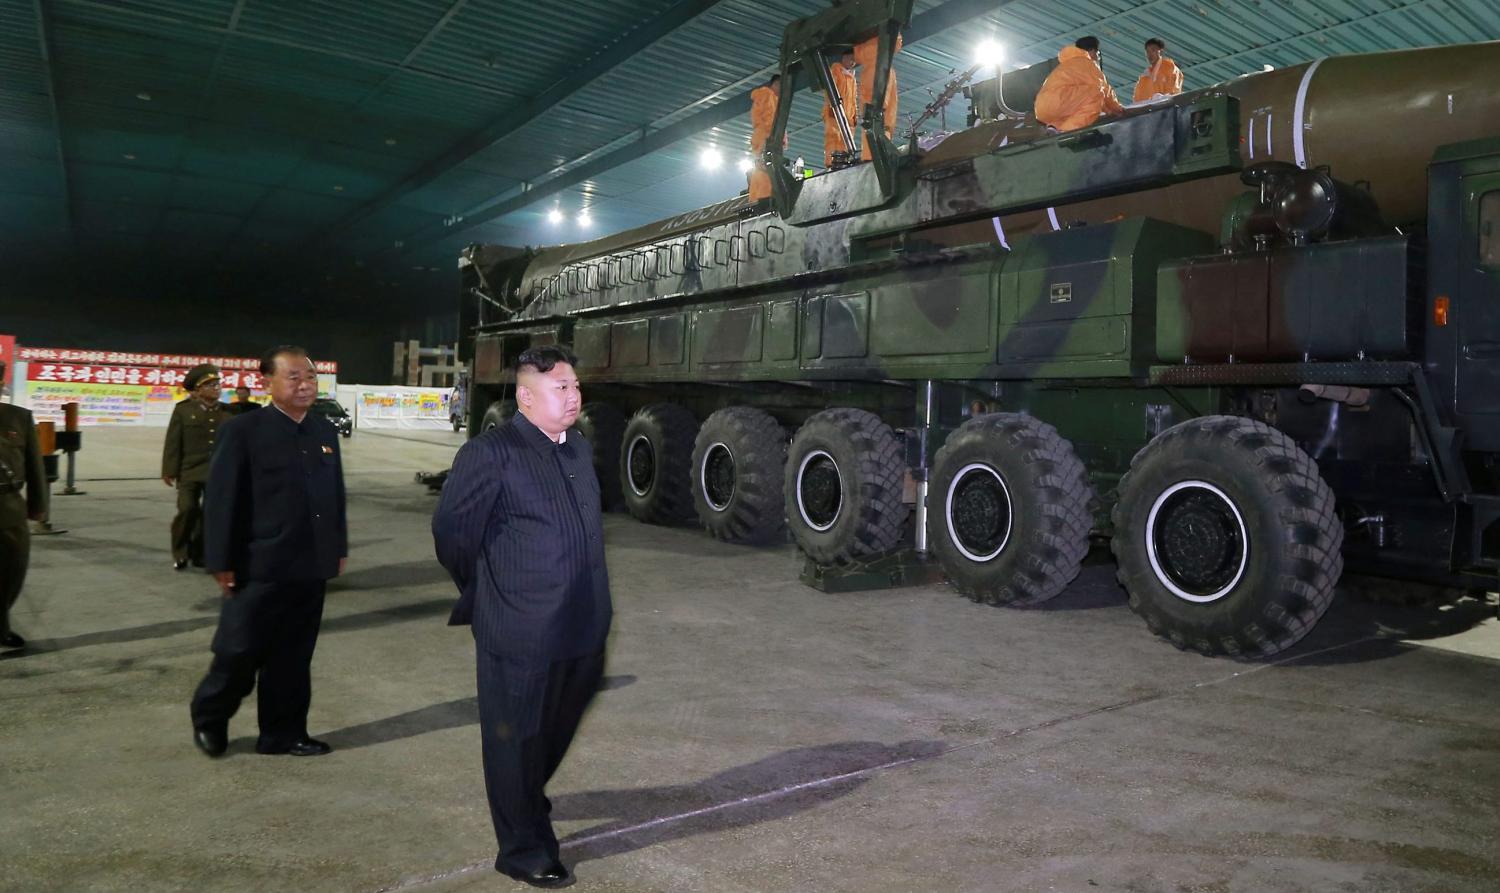 North Korean leader Kim Jong Un inspects the intercontinental ballistic missile Hwasong-14 in this undated photo released by North Korea's Korean Central News Agency (